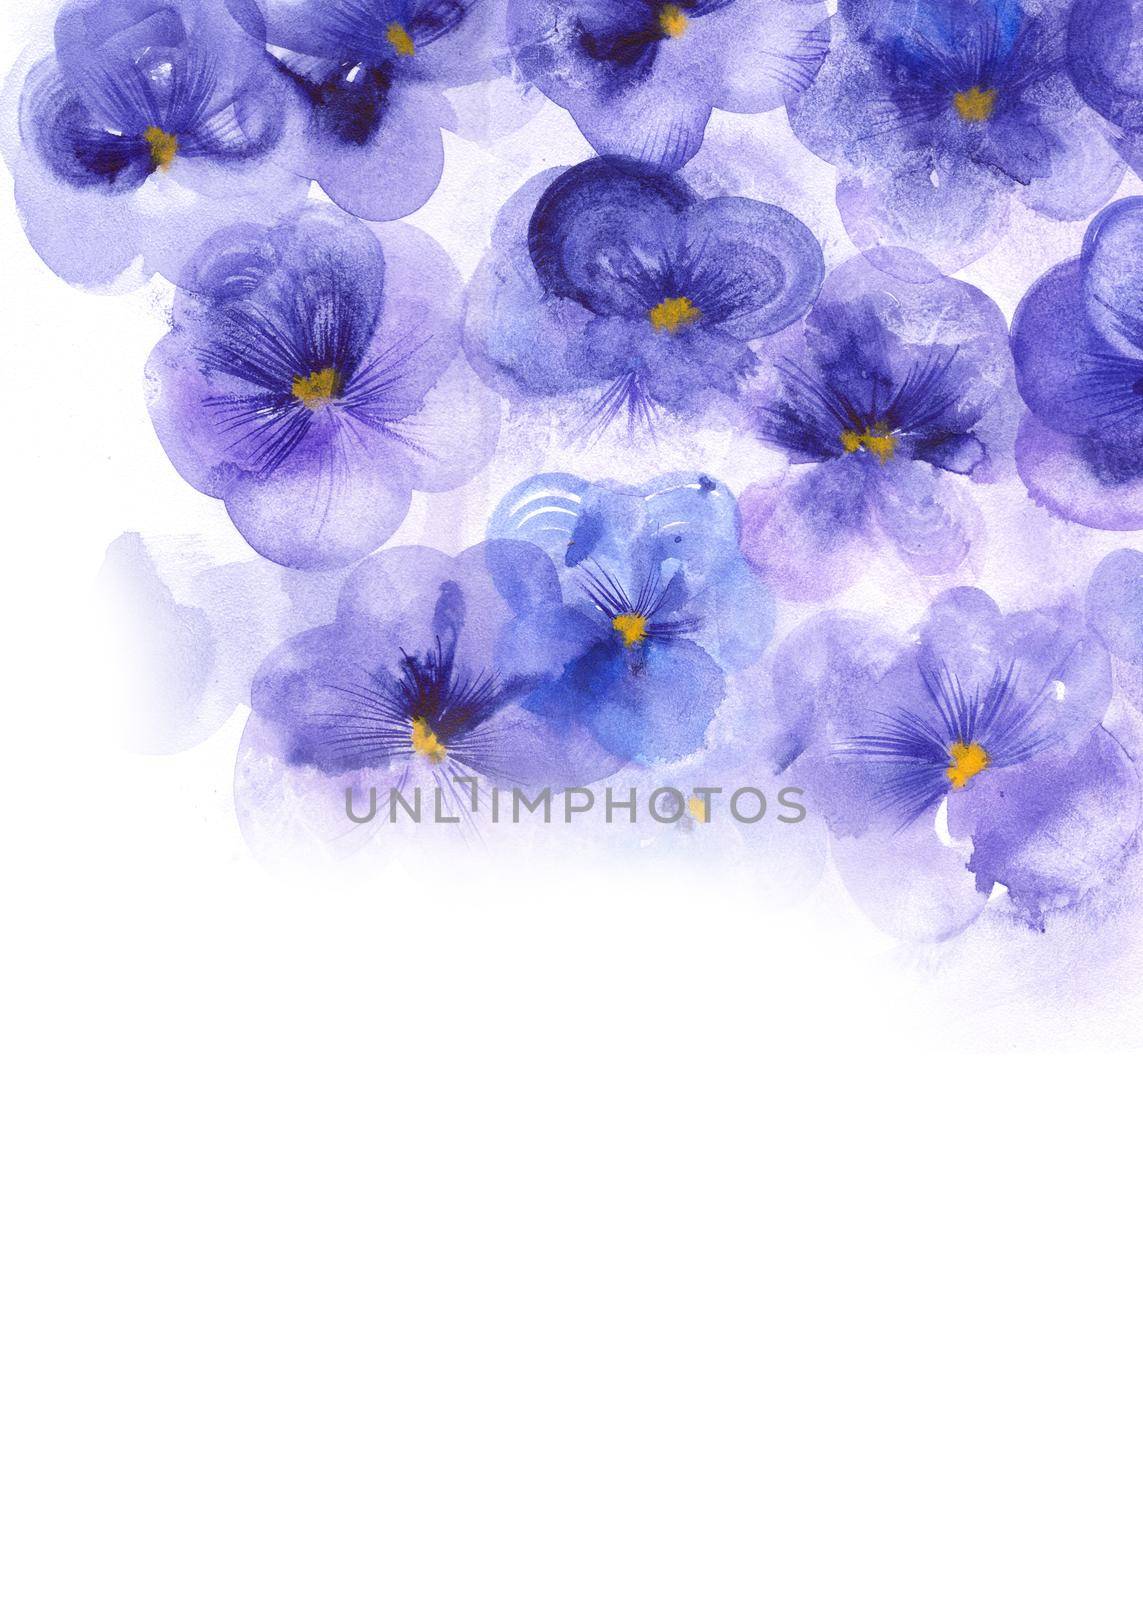 Purple flowers pansies. Template for the elegant design of invitations, cards, greetings or for high-res art prints